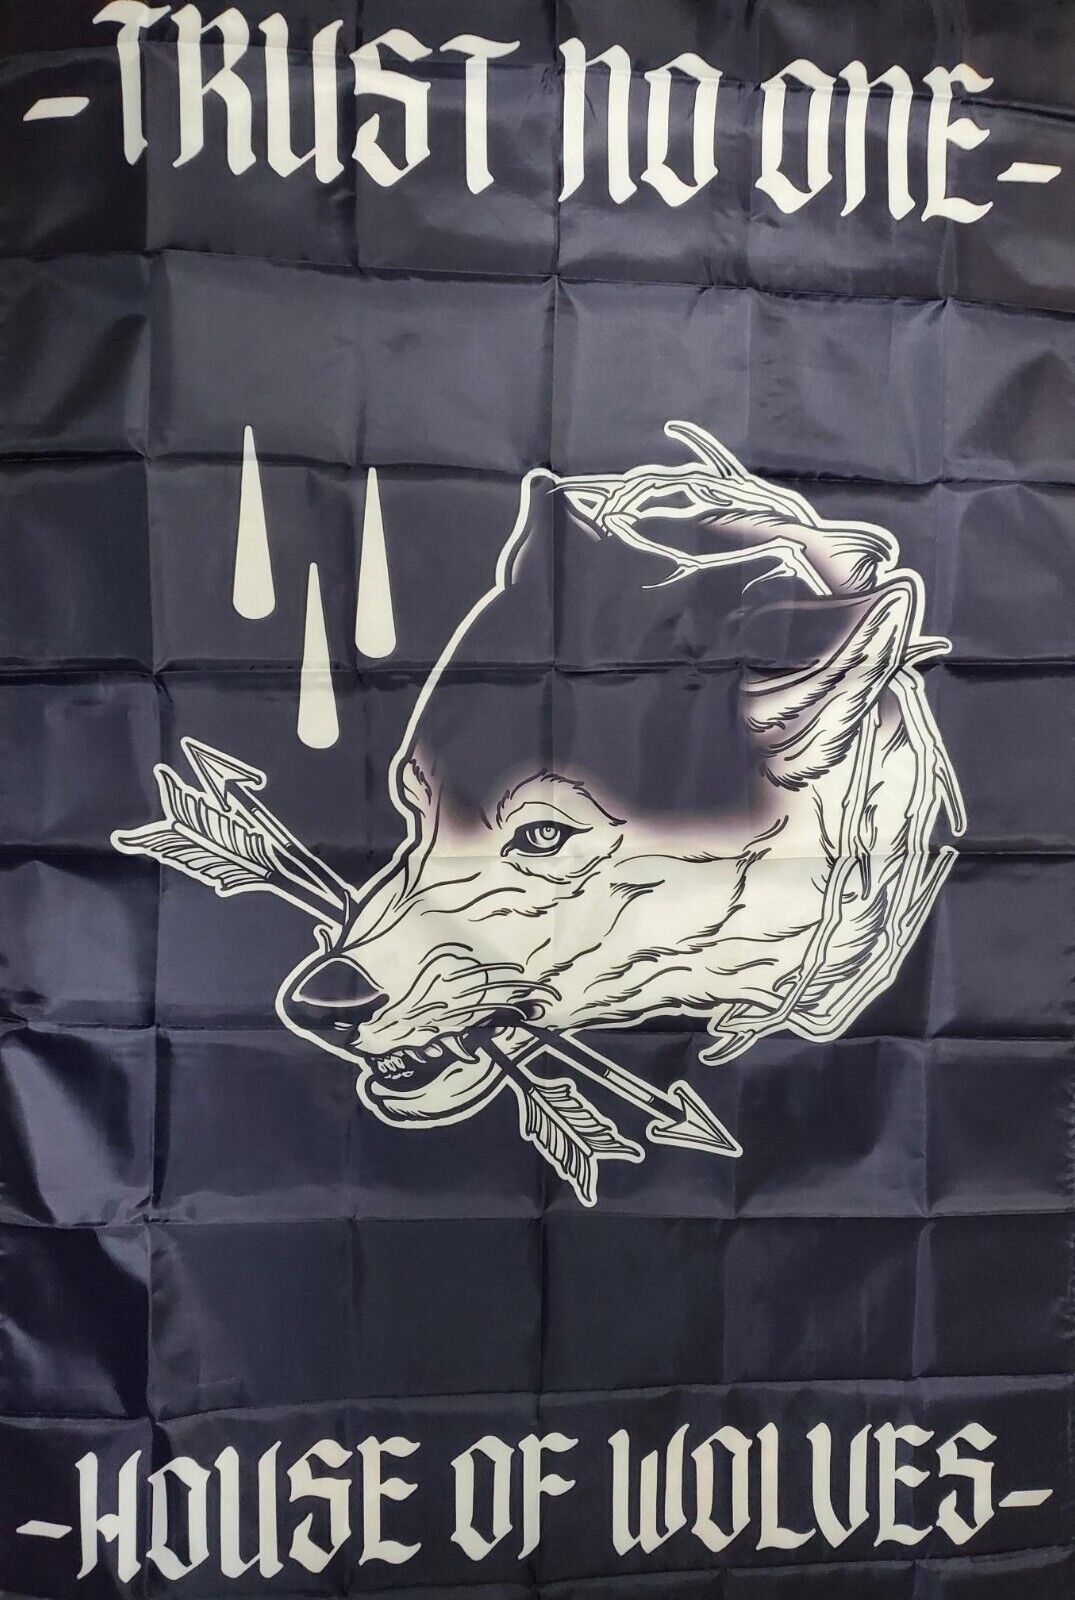 House of Wolves - Gypsy Walters Trust No One FLAG (RARE) Black